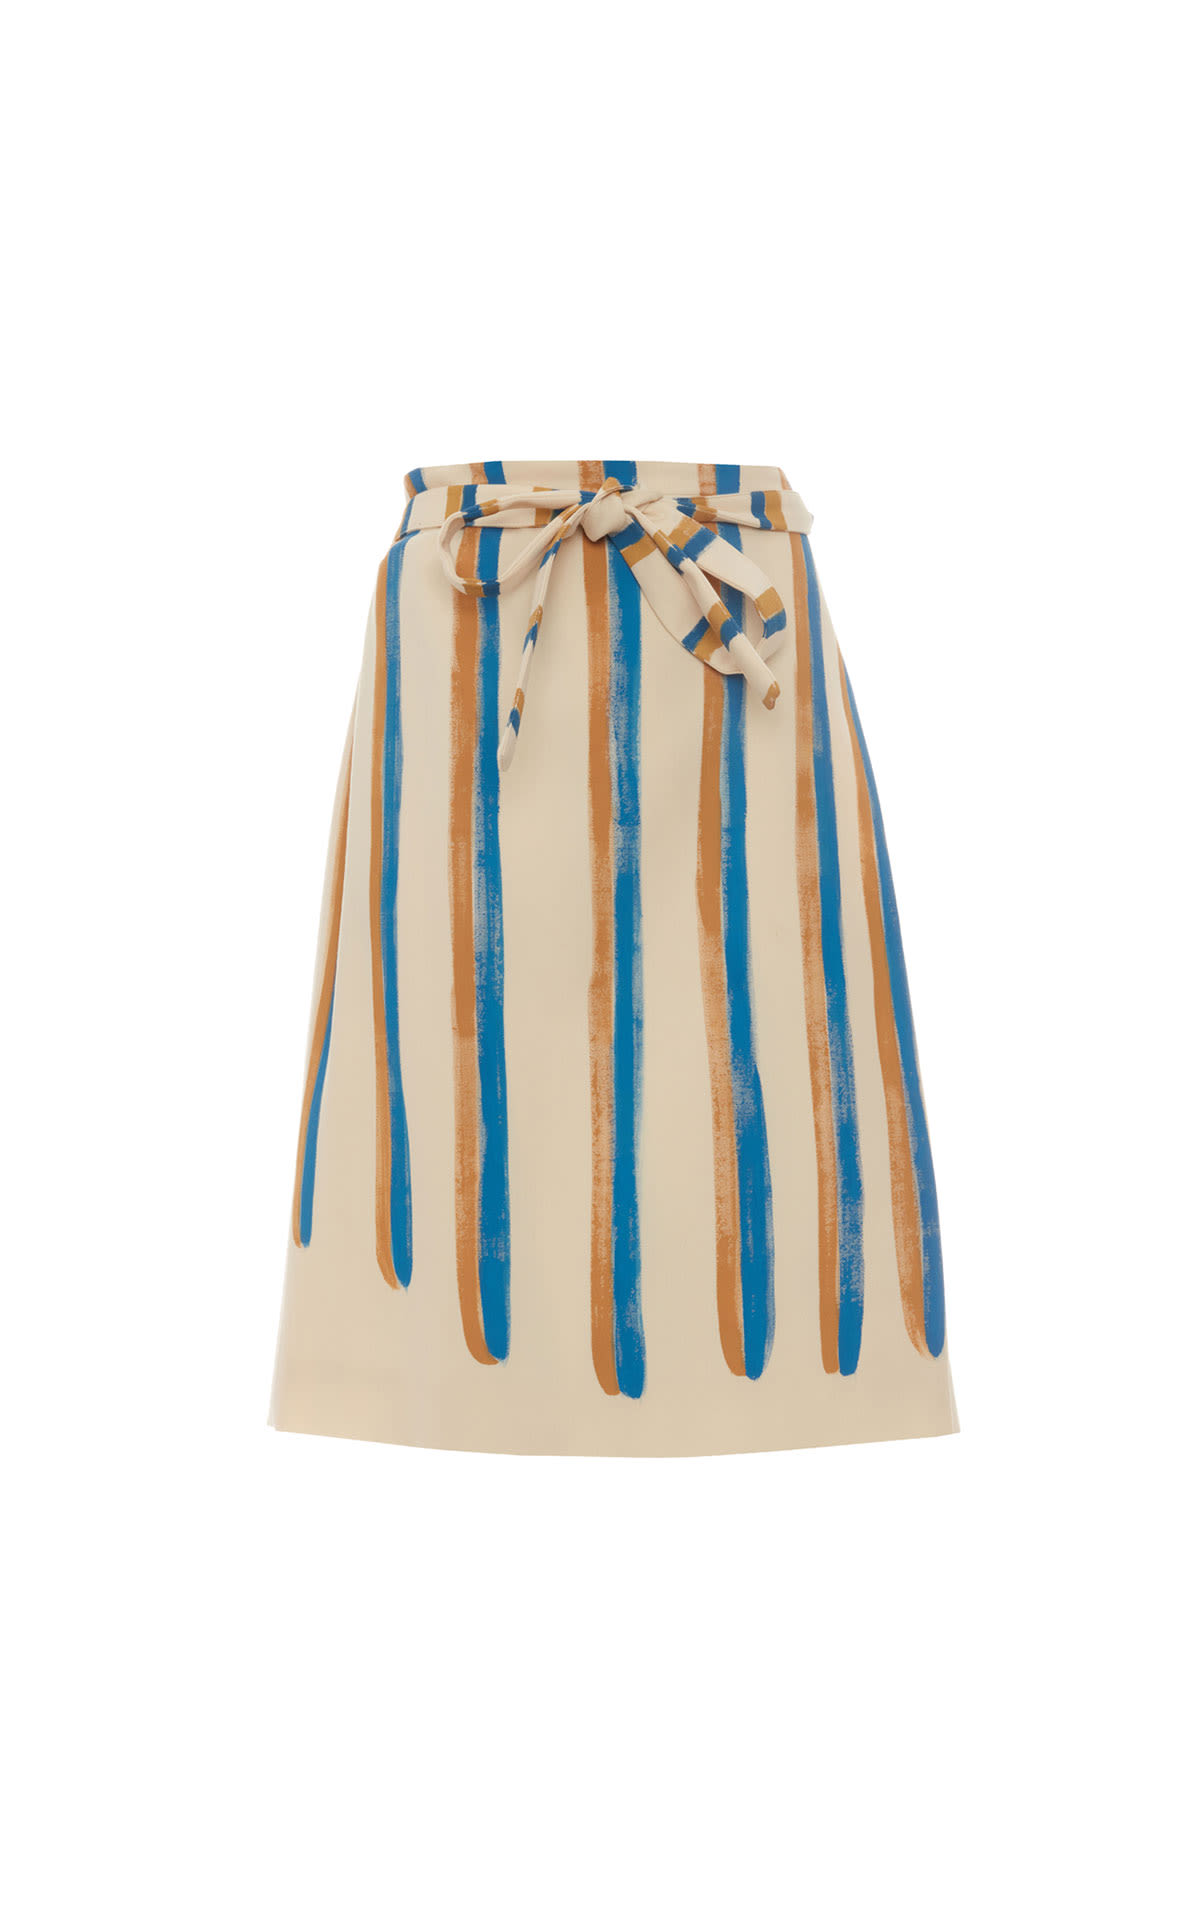 Marni Printed skirt from Bicester Village